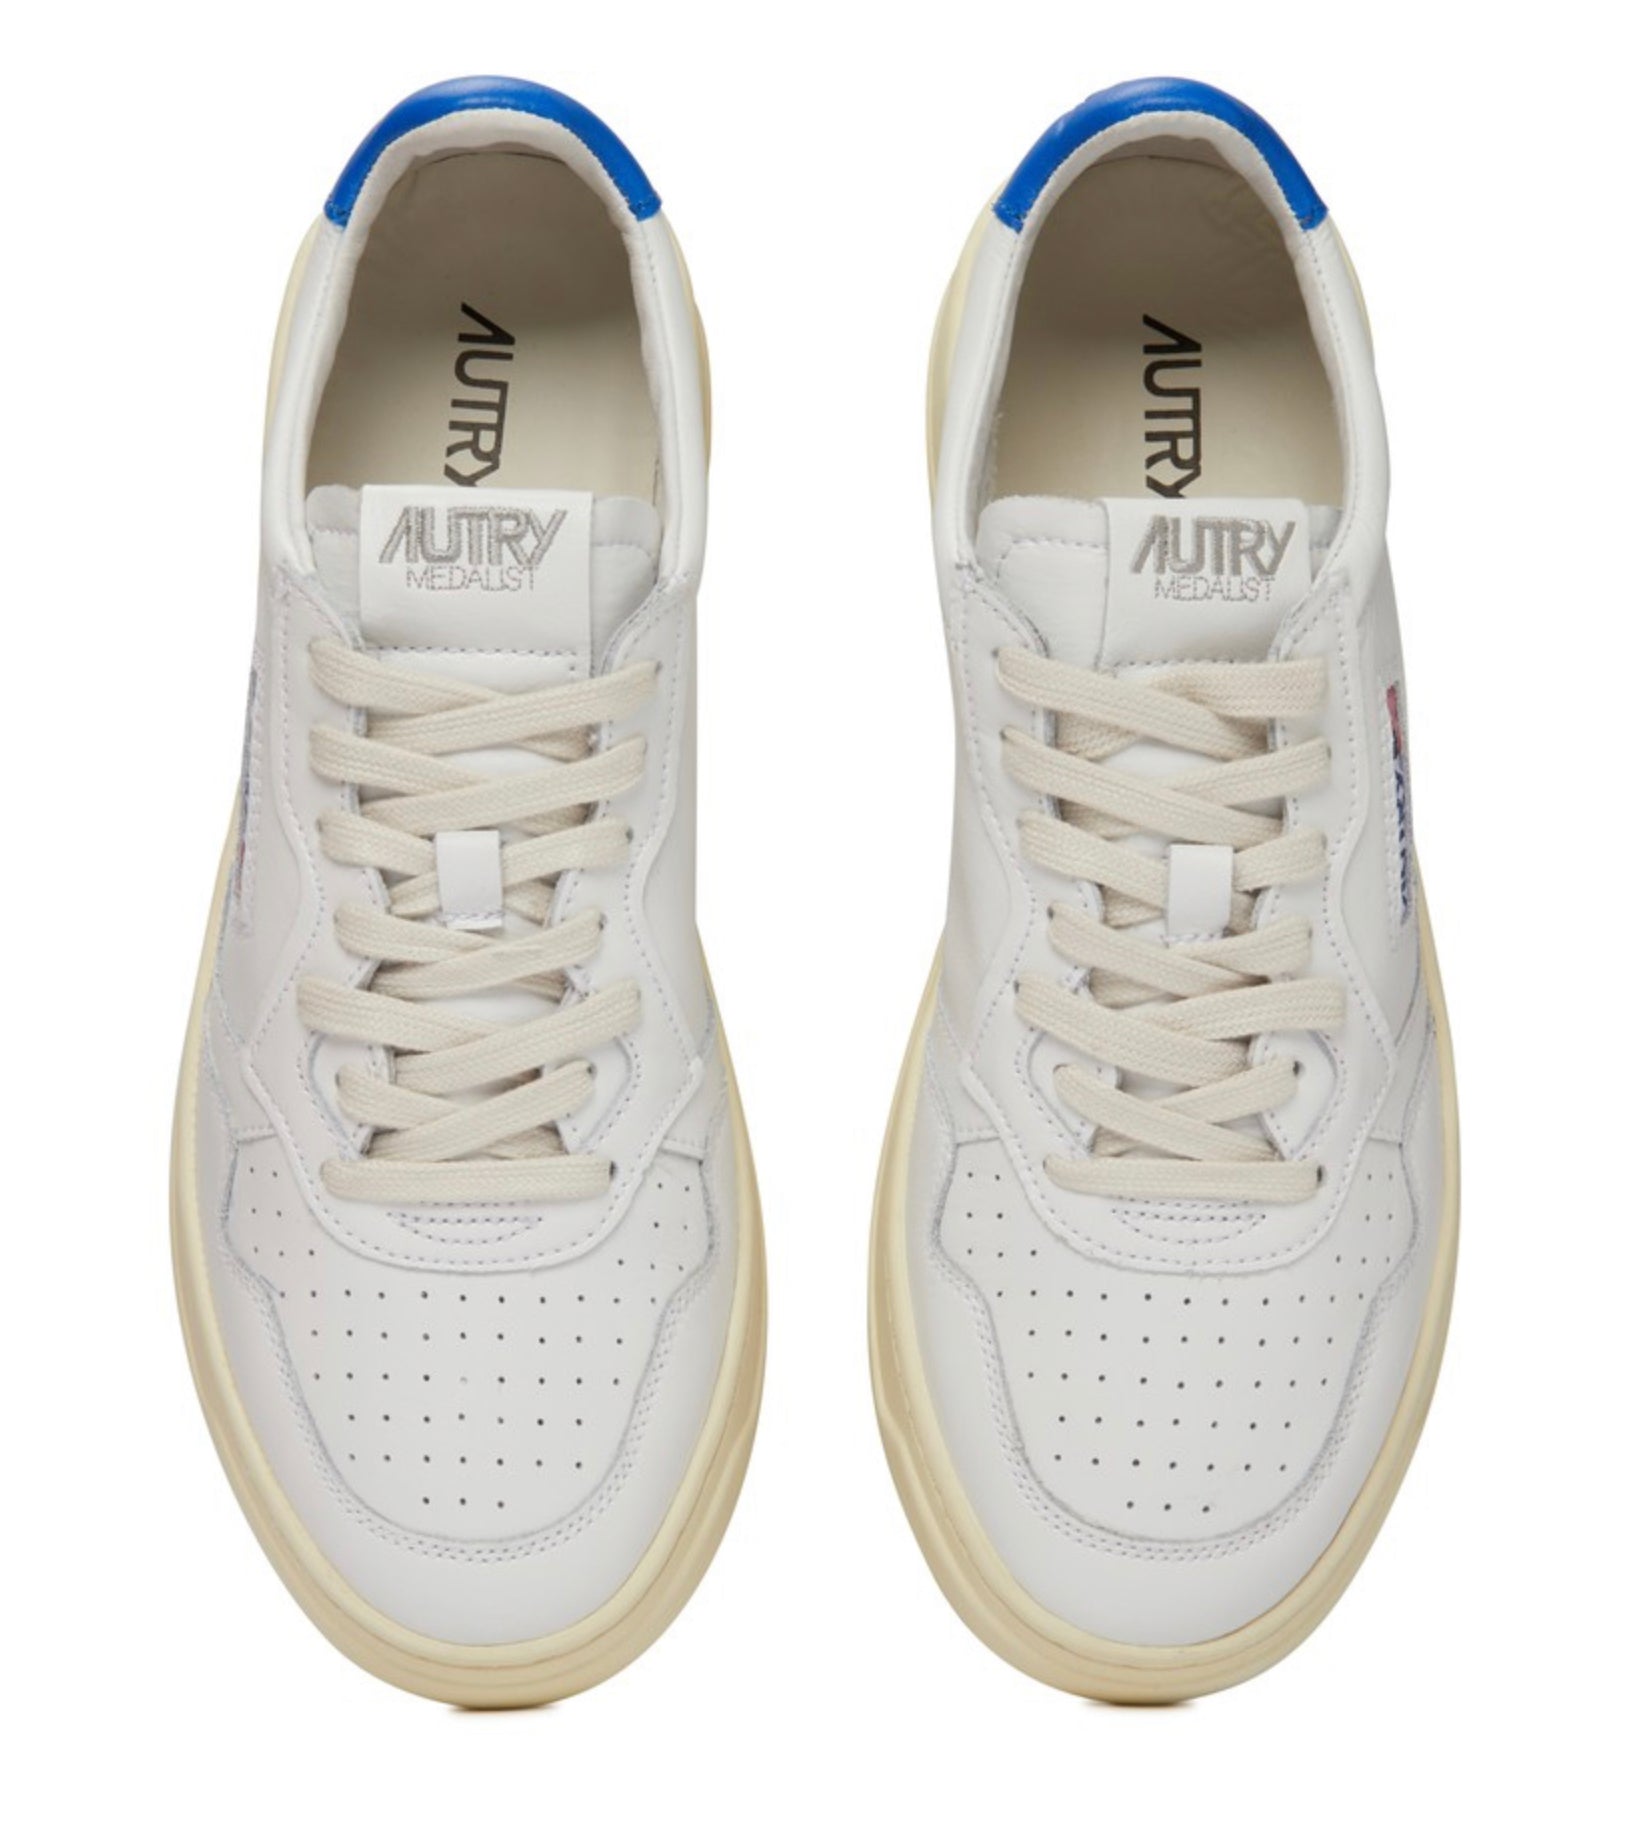 Autry Action Shoes Low Man Leather - White & P Blue (Excluded from discount) , Trainers, Autry, Working Title